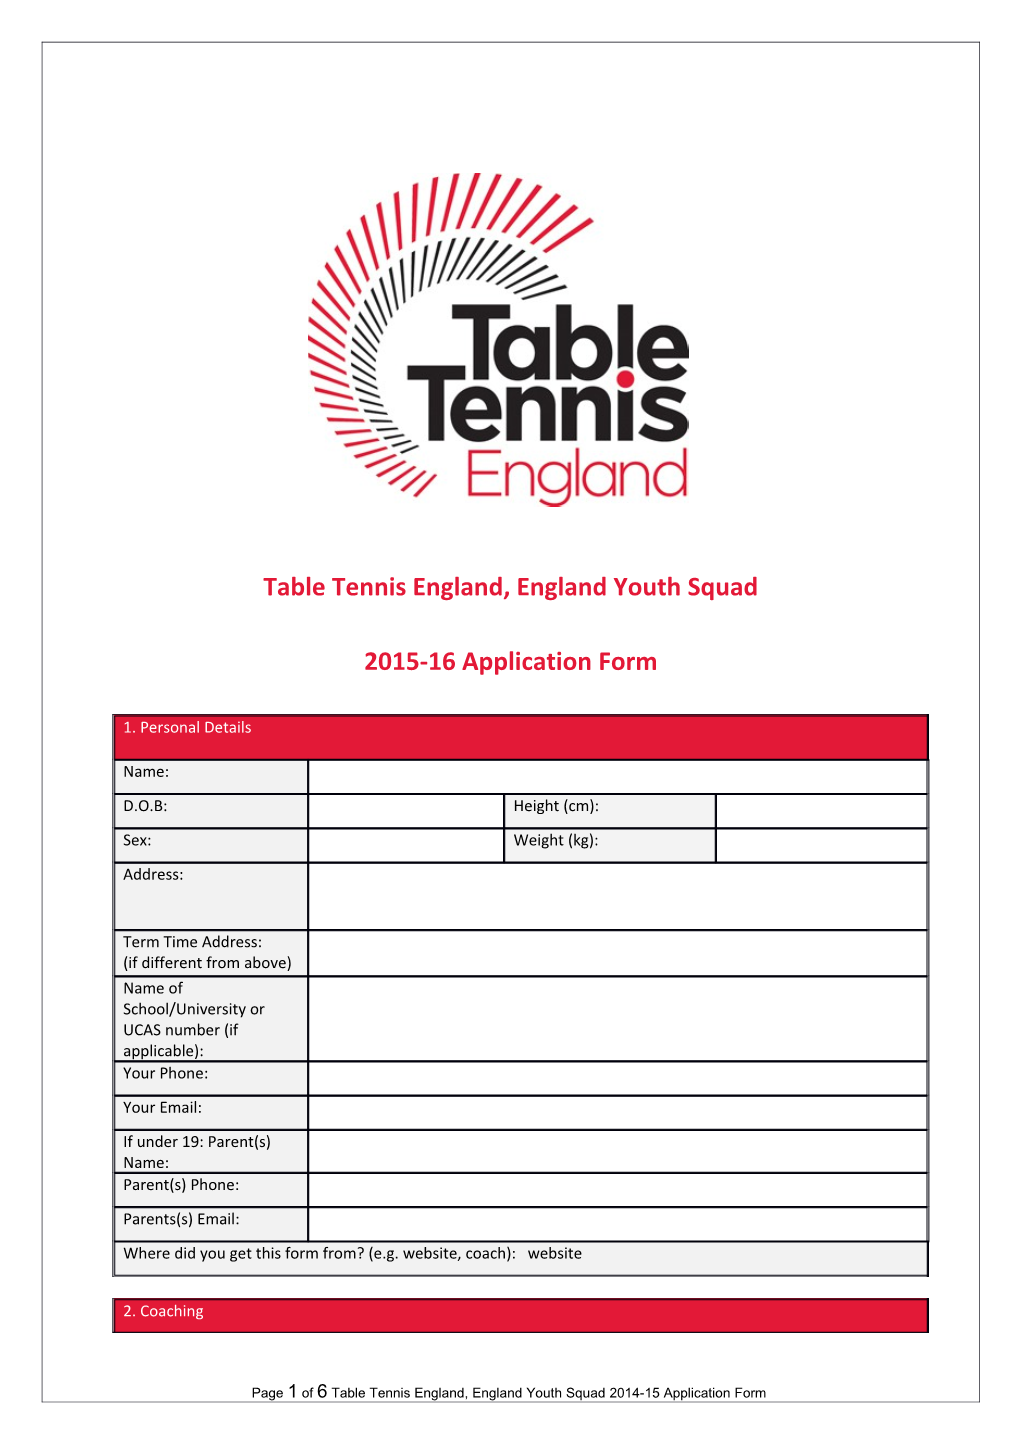 Table Tennis England, England Youth Squad